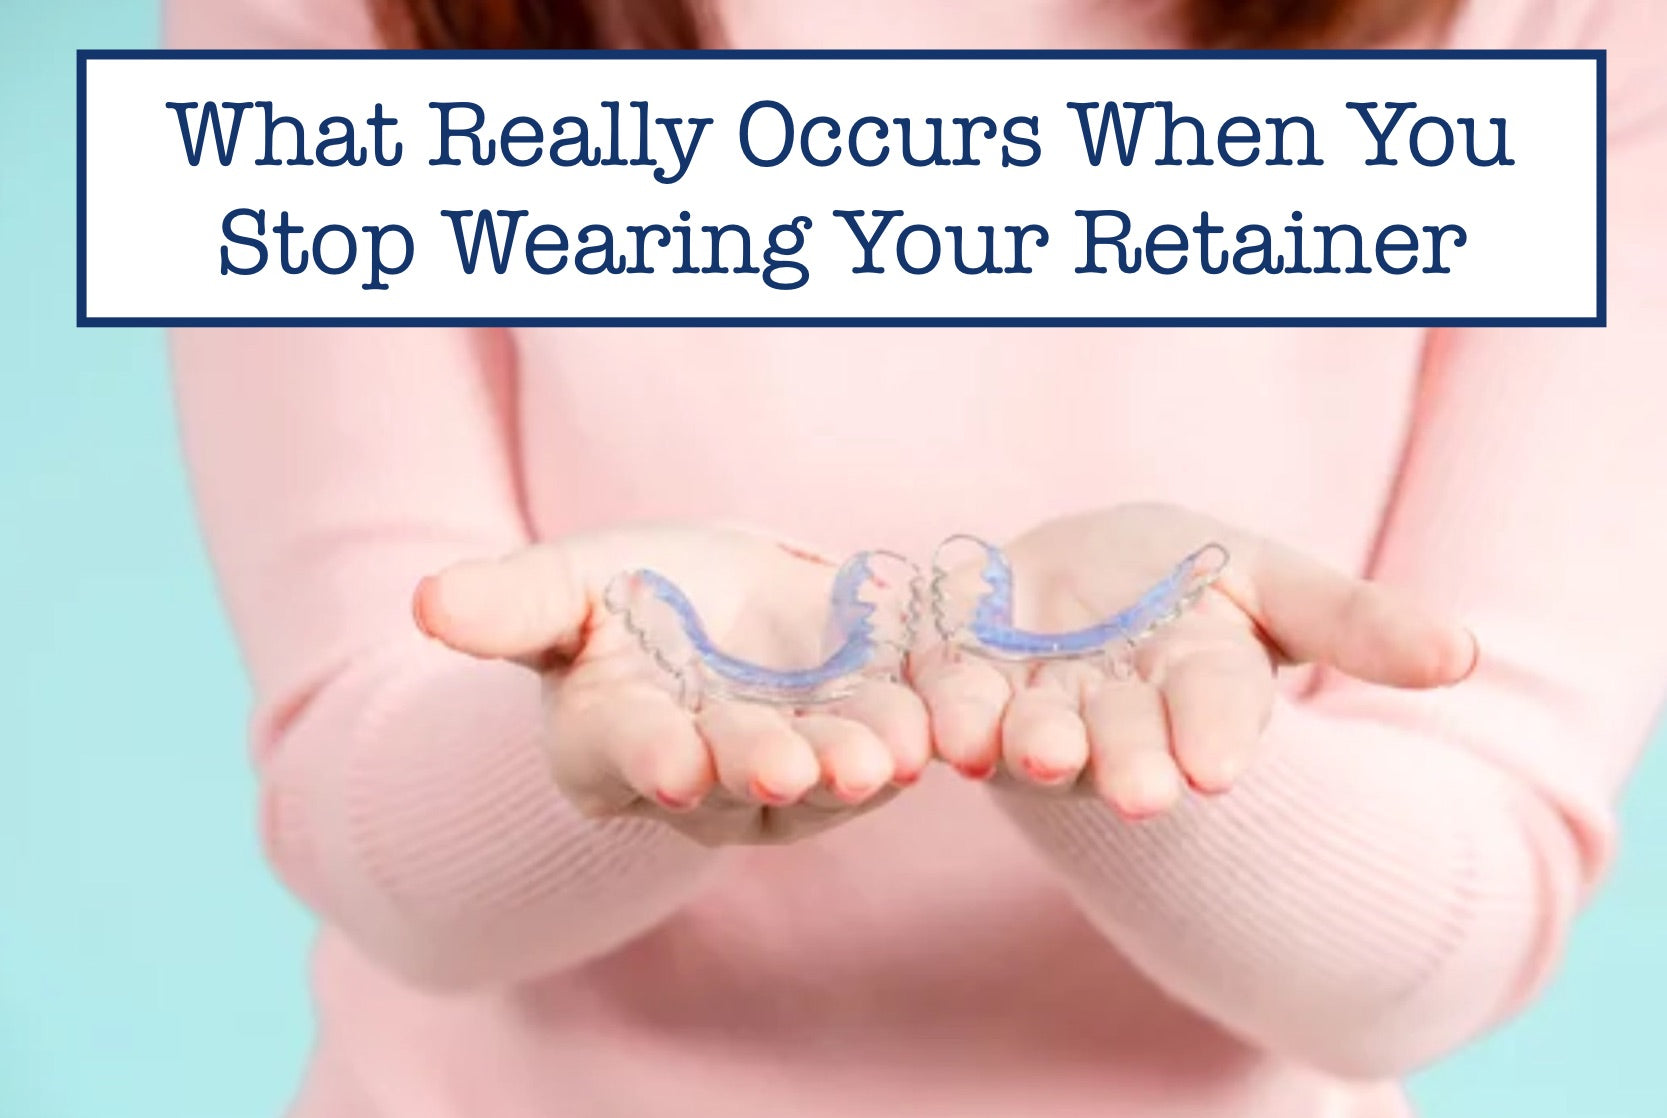 What Really Occurs When You Stop Wearing Your Retainer